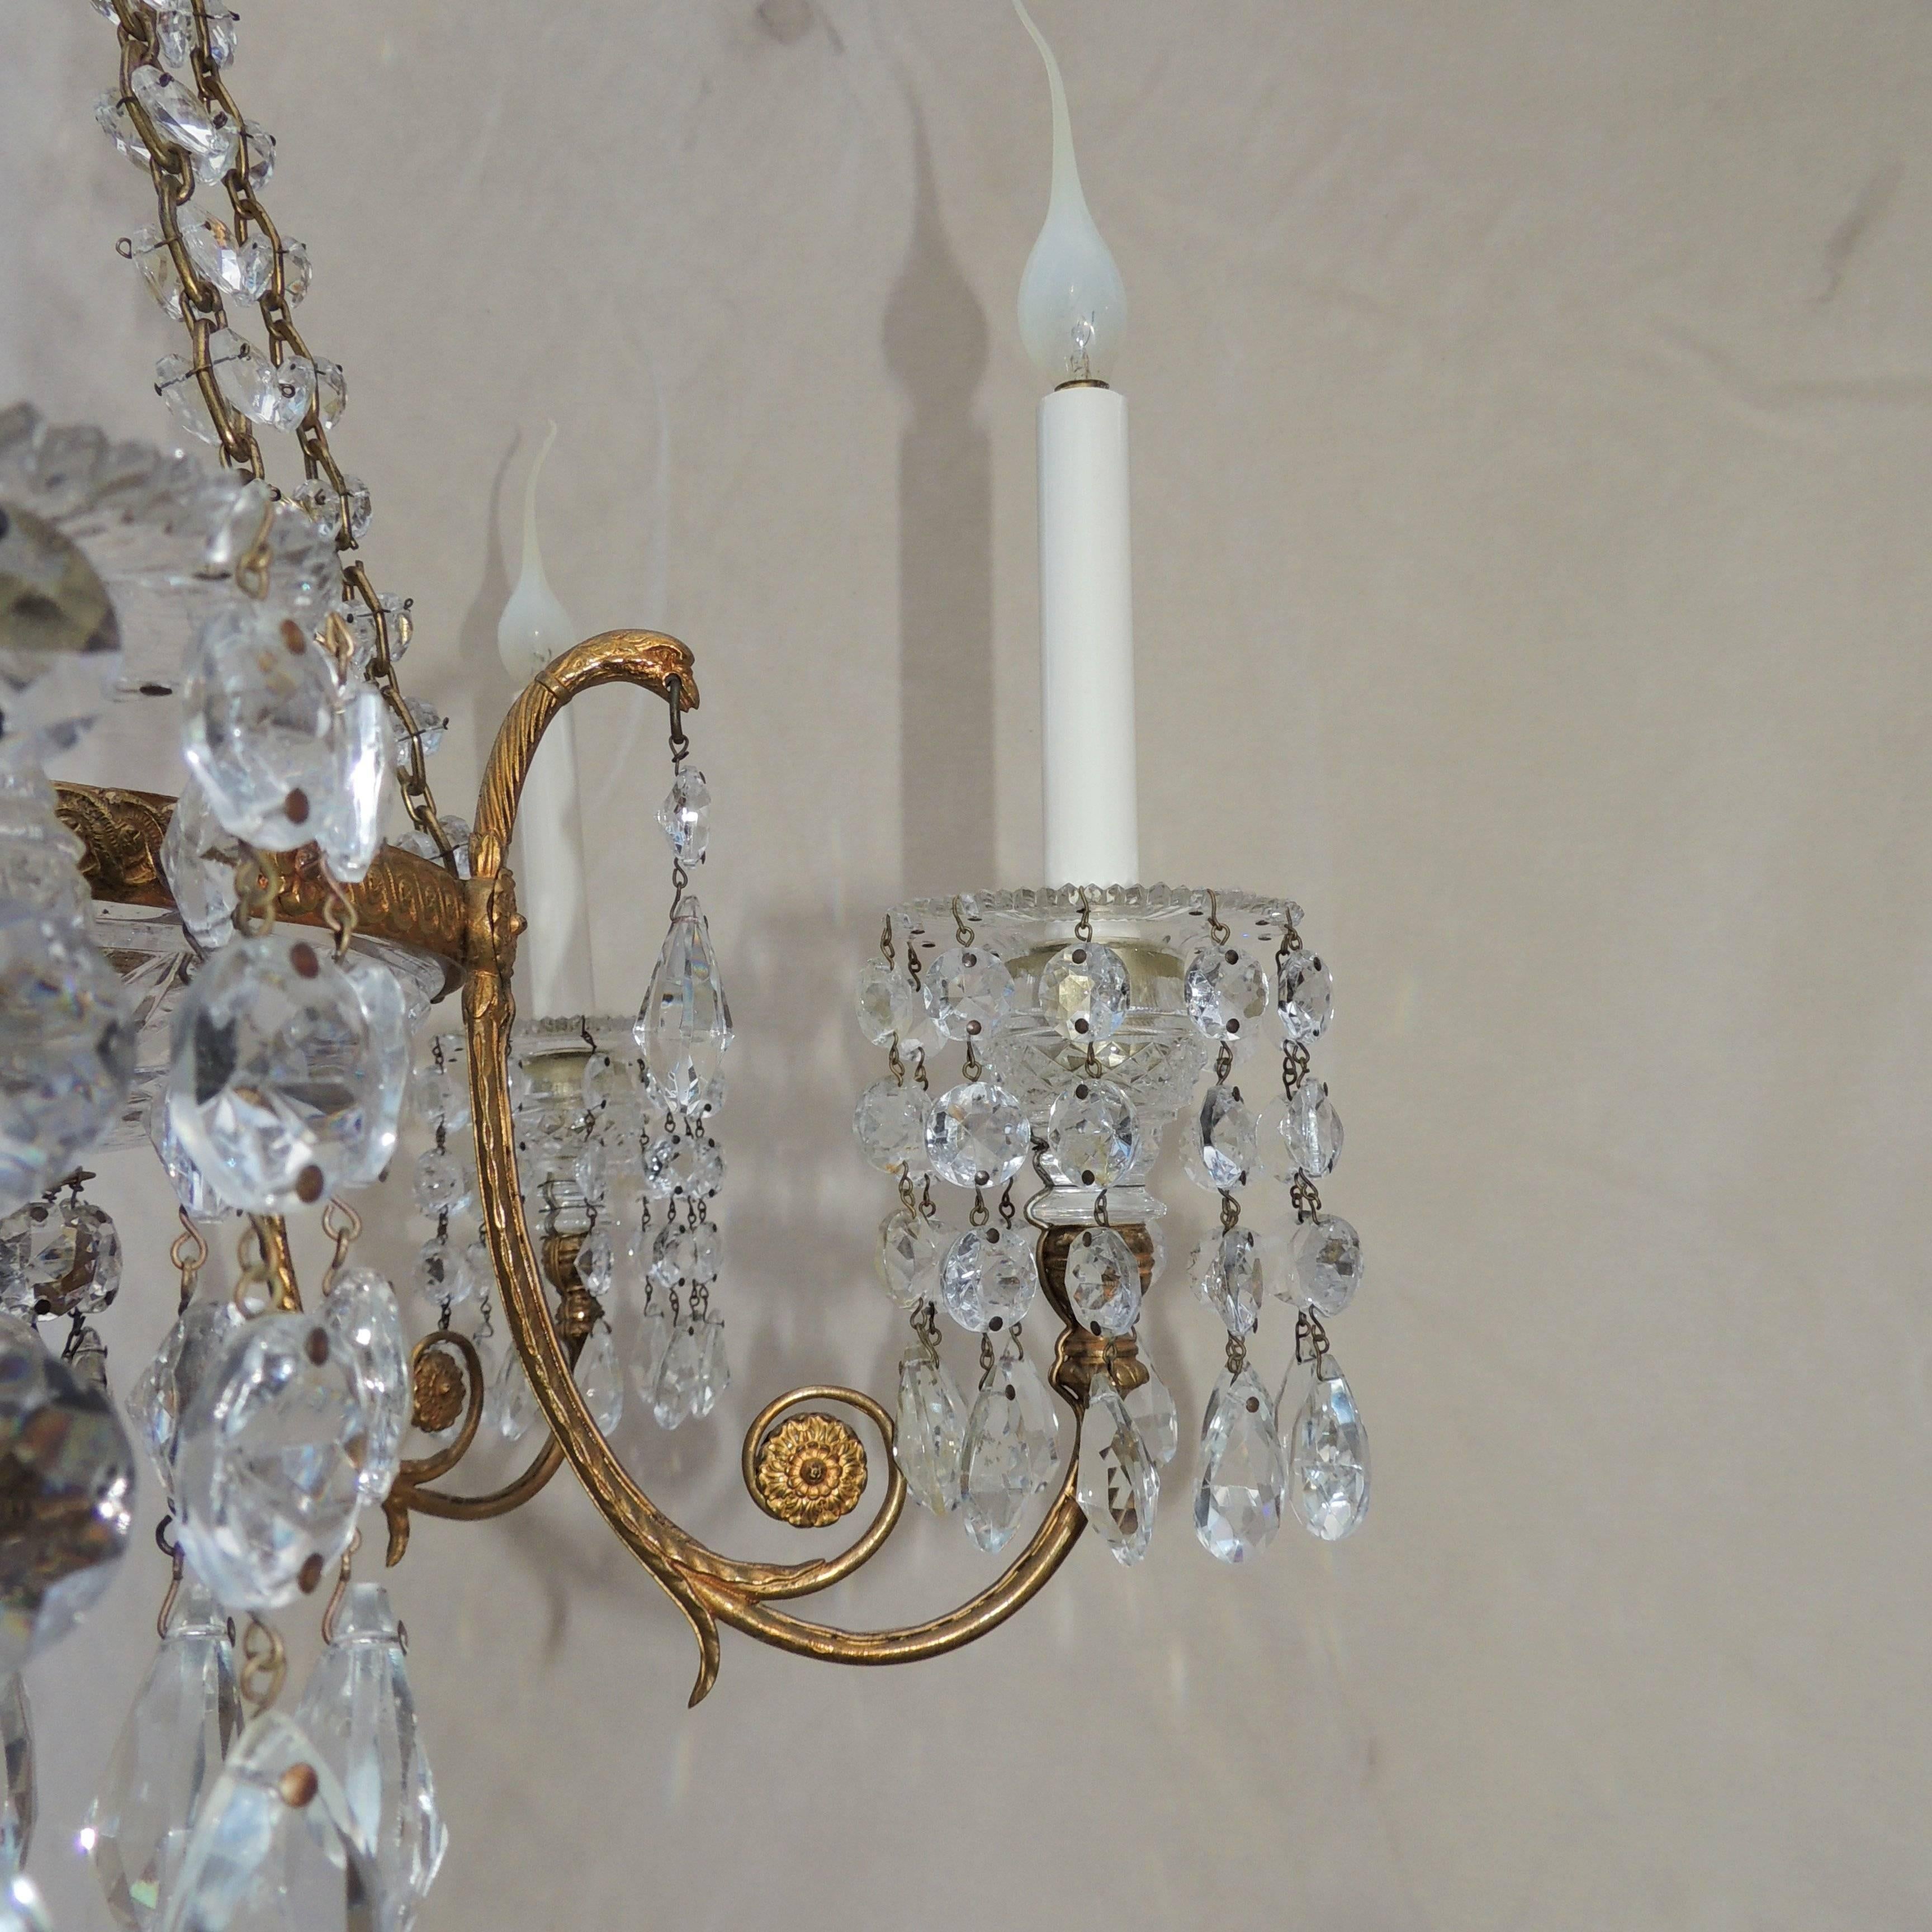 Early 20th Century Fine French Doré Bronze Cut Crystal Bowl Neoclassical Empire Chandelier Fixture